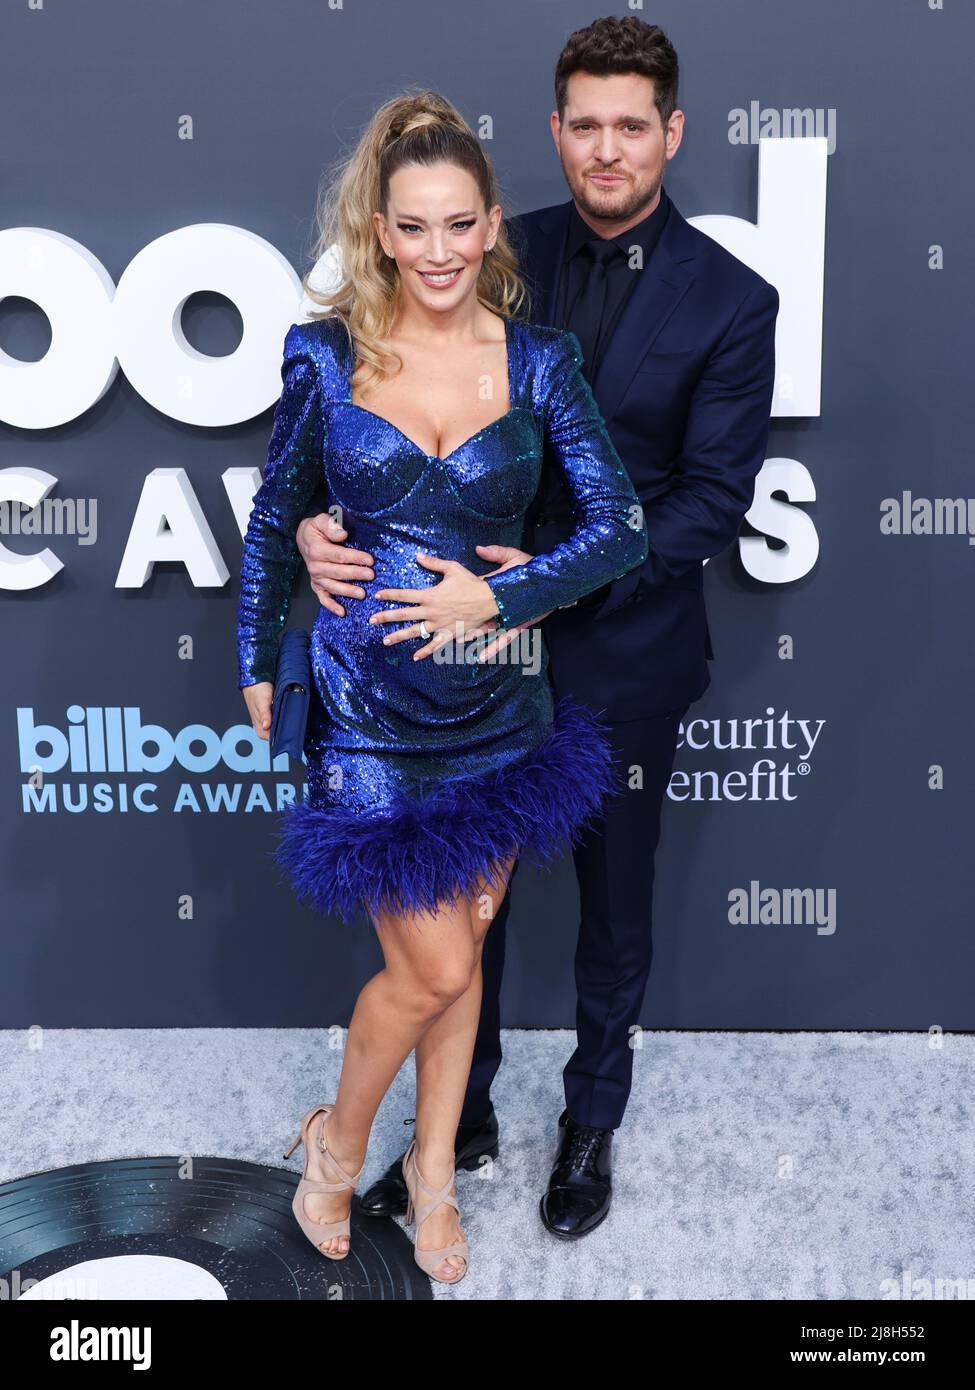 LAS VEGAS, NEVADA, USA - MAY 15: Michael Bublé (Michael Buble) and Luisana Lopilato arrive at the 2022 Billboard Music Awards held at the MGM Grand Garden Arena on May 15, 2022 in Las Vegas, Nevada, United States. (Photo by Xavier Collin/Image Press Agency) Stock Photo